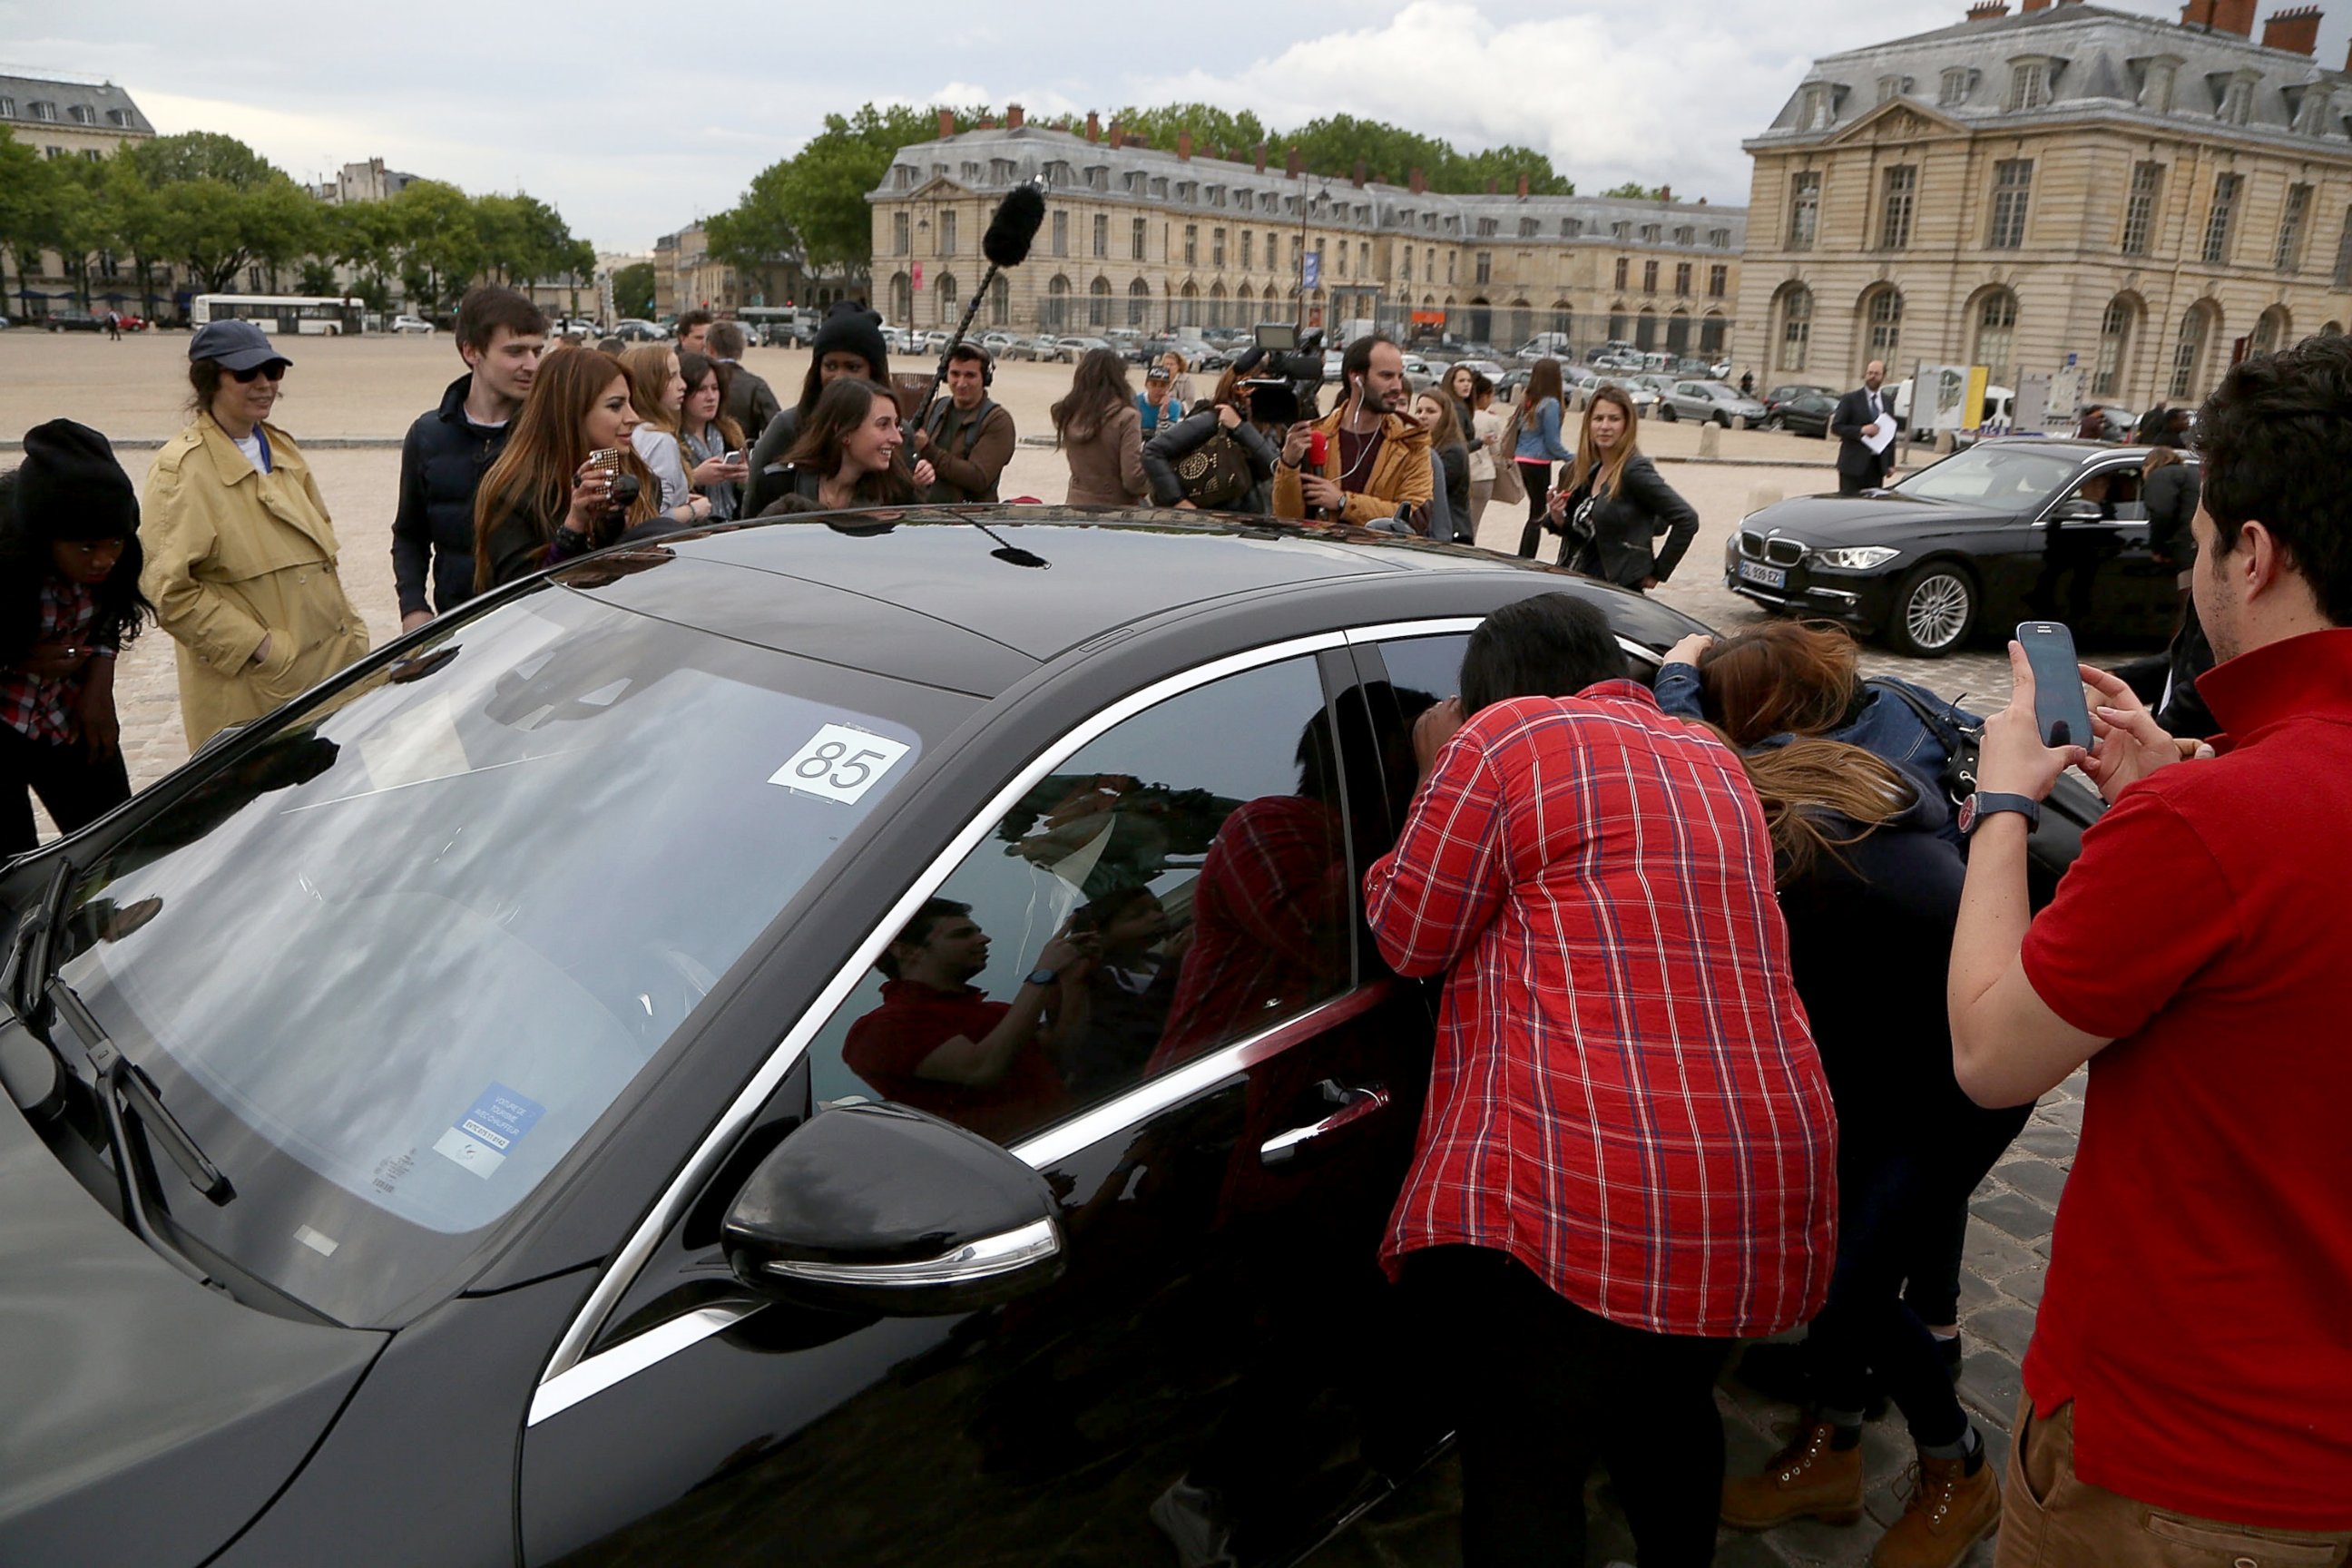 PHOTO: Guests arrivals at the 'Chateau de Versailes' ahead Kanye West and Kim Kardashian's pre-wedding dinner on May 23, 2014, in Versailles, France.